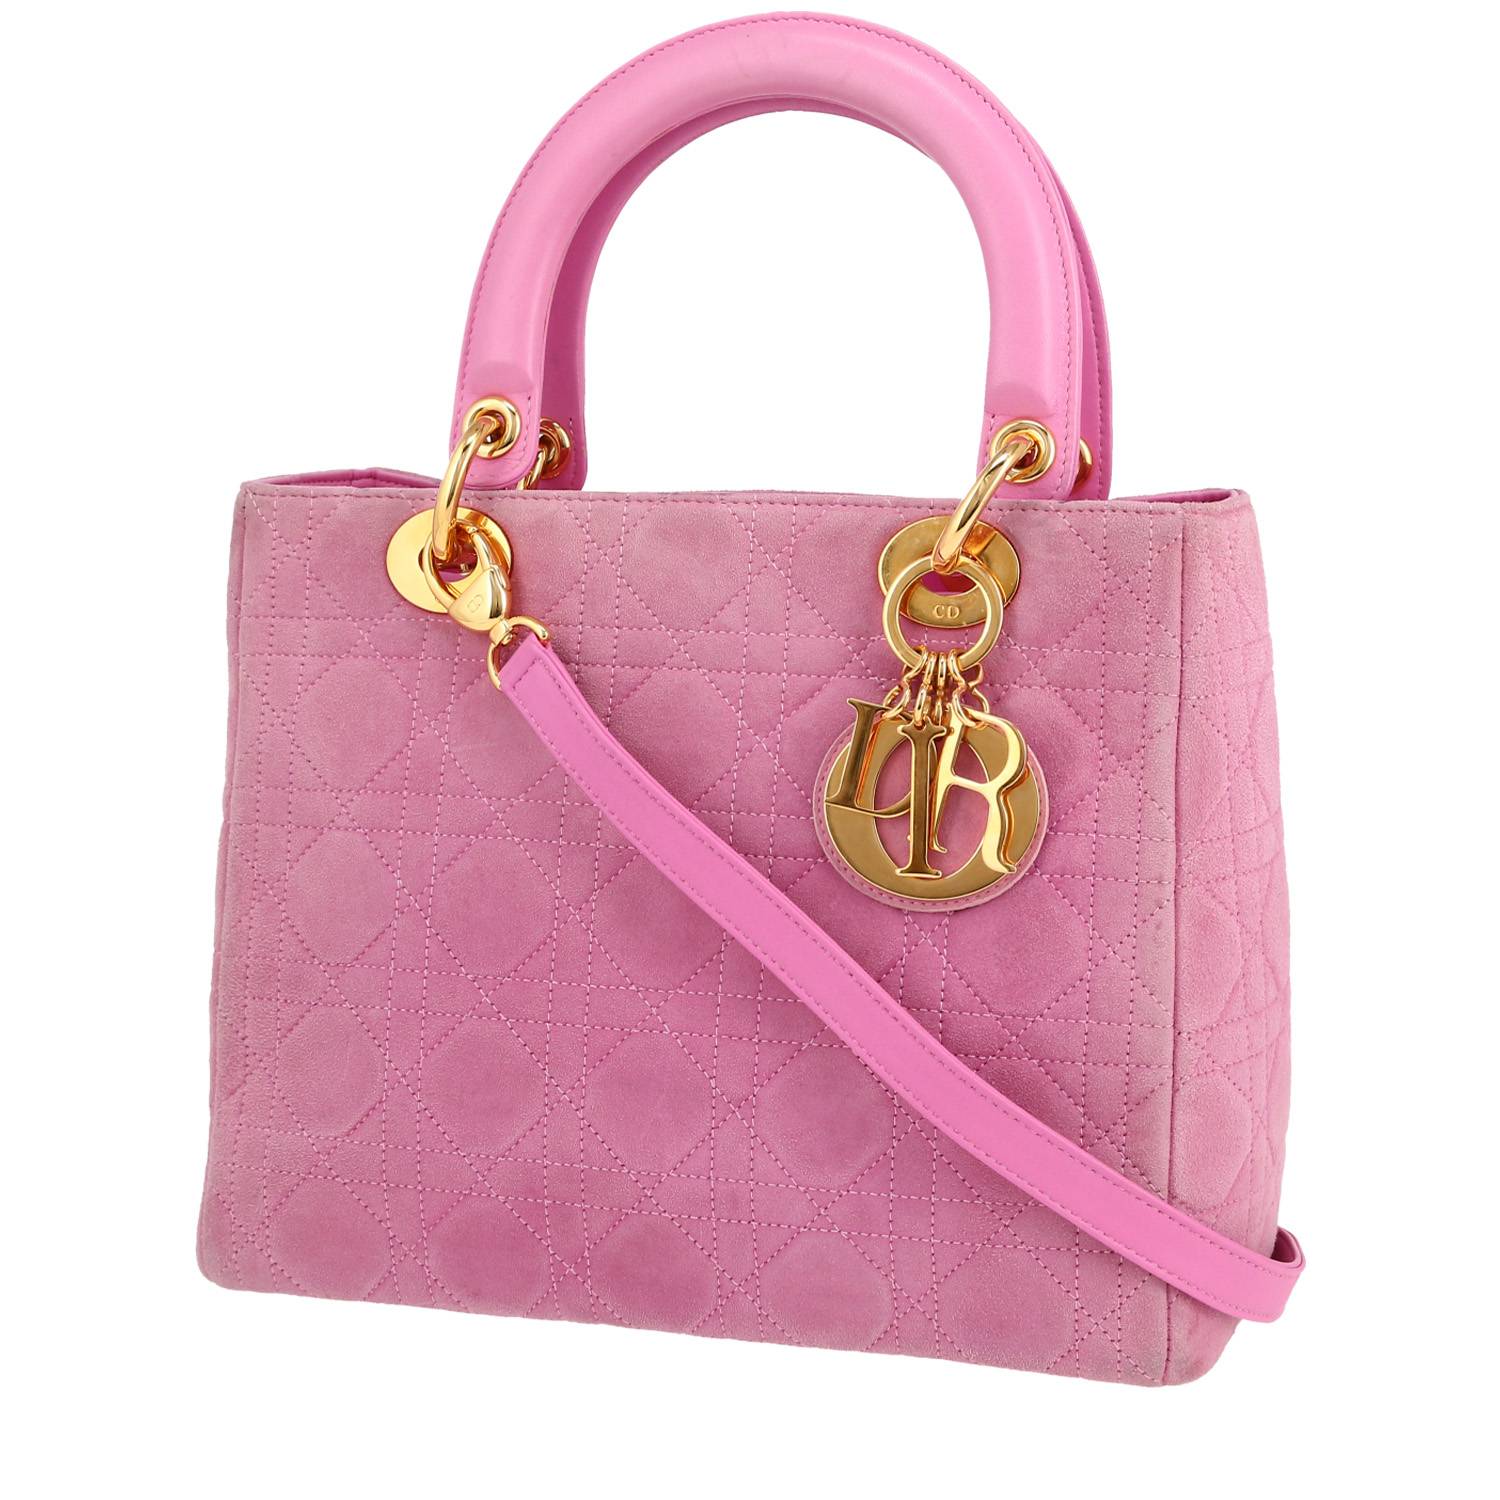 Lady Dior Medium Model Handbag In Pink Suede And Pink Leather